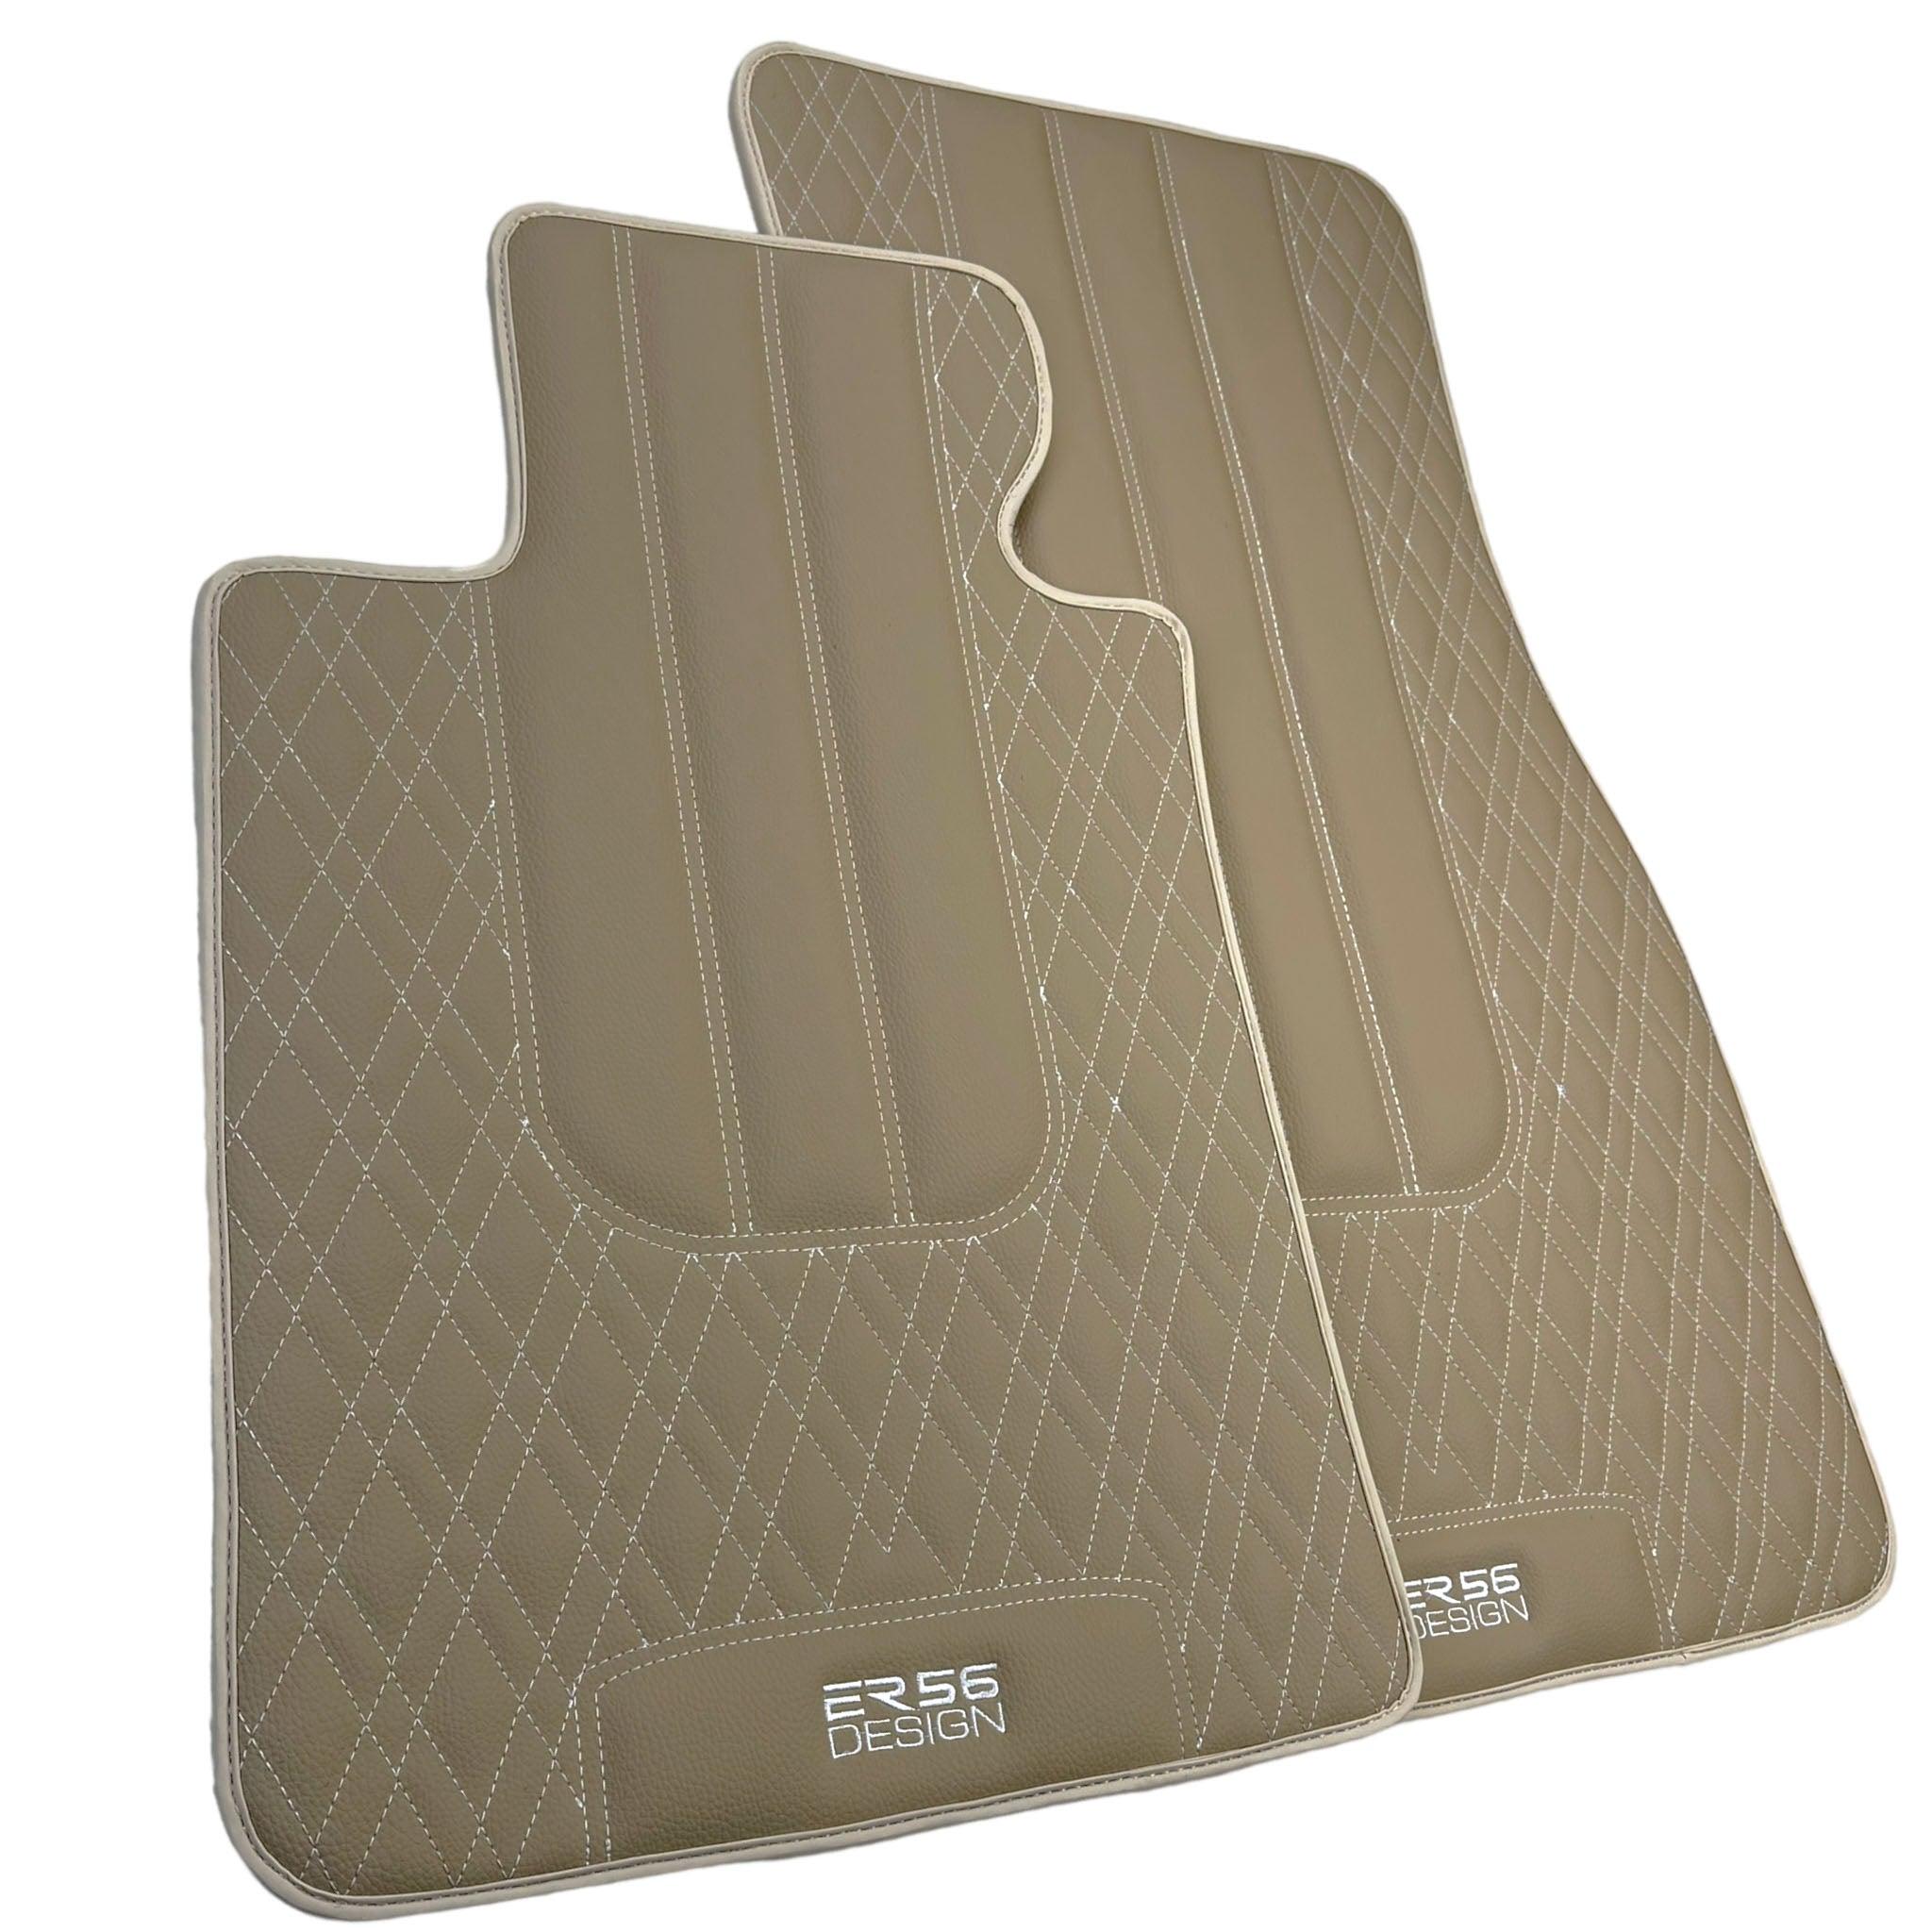 Beige Leather Floor Mats For BMW 7 Series E32